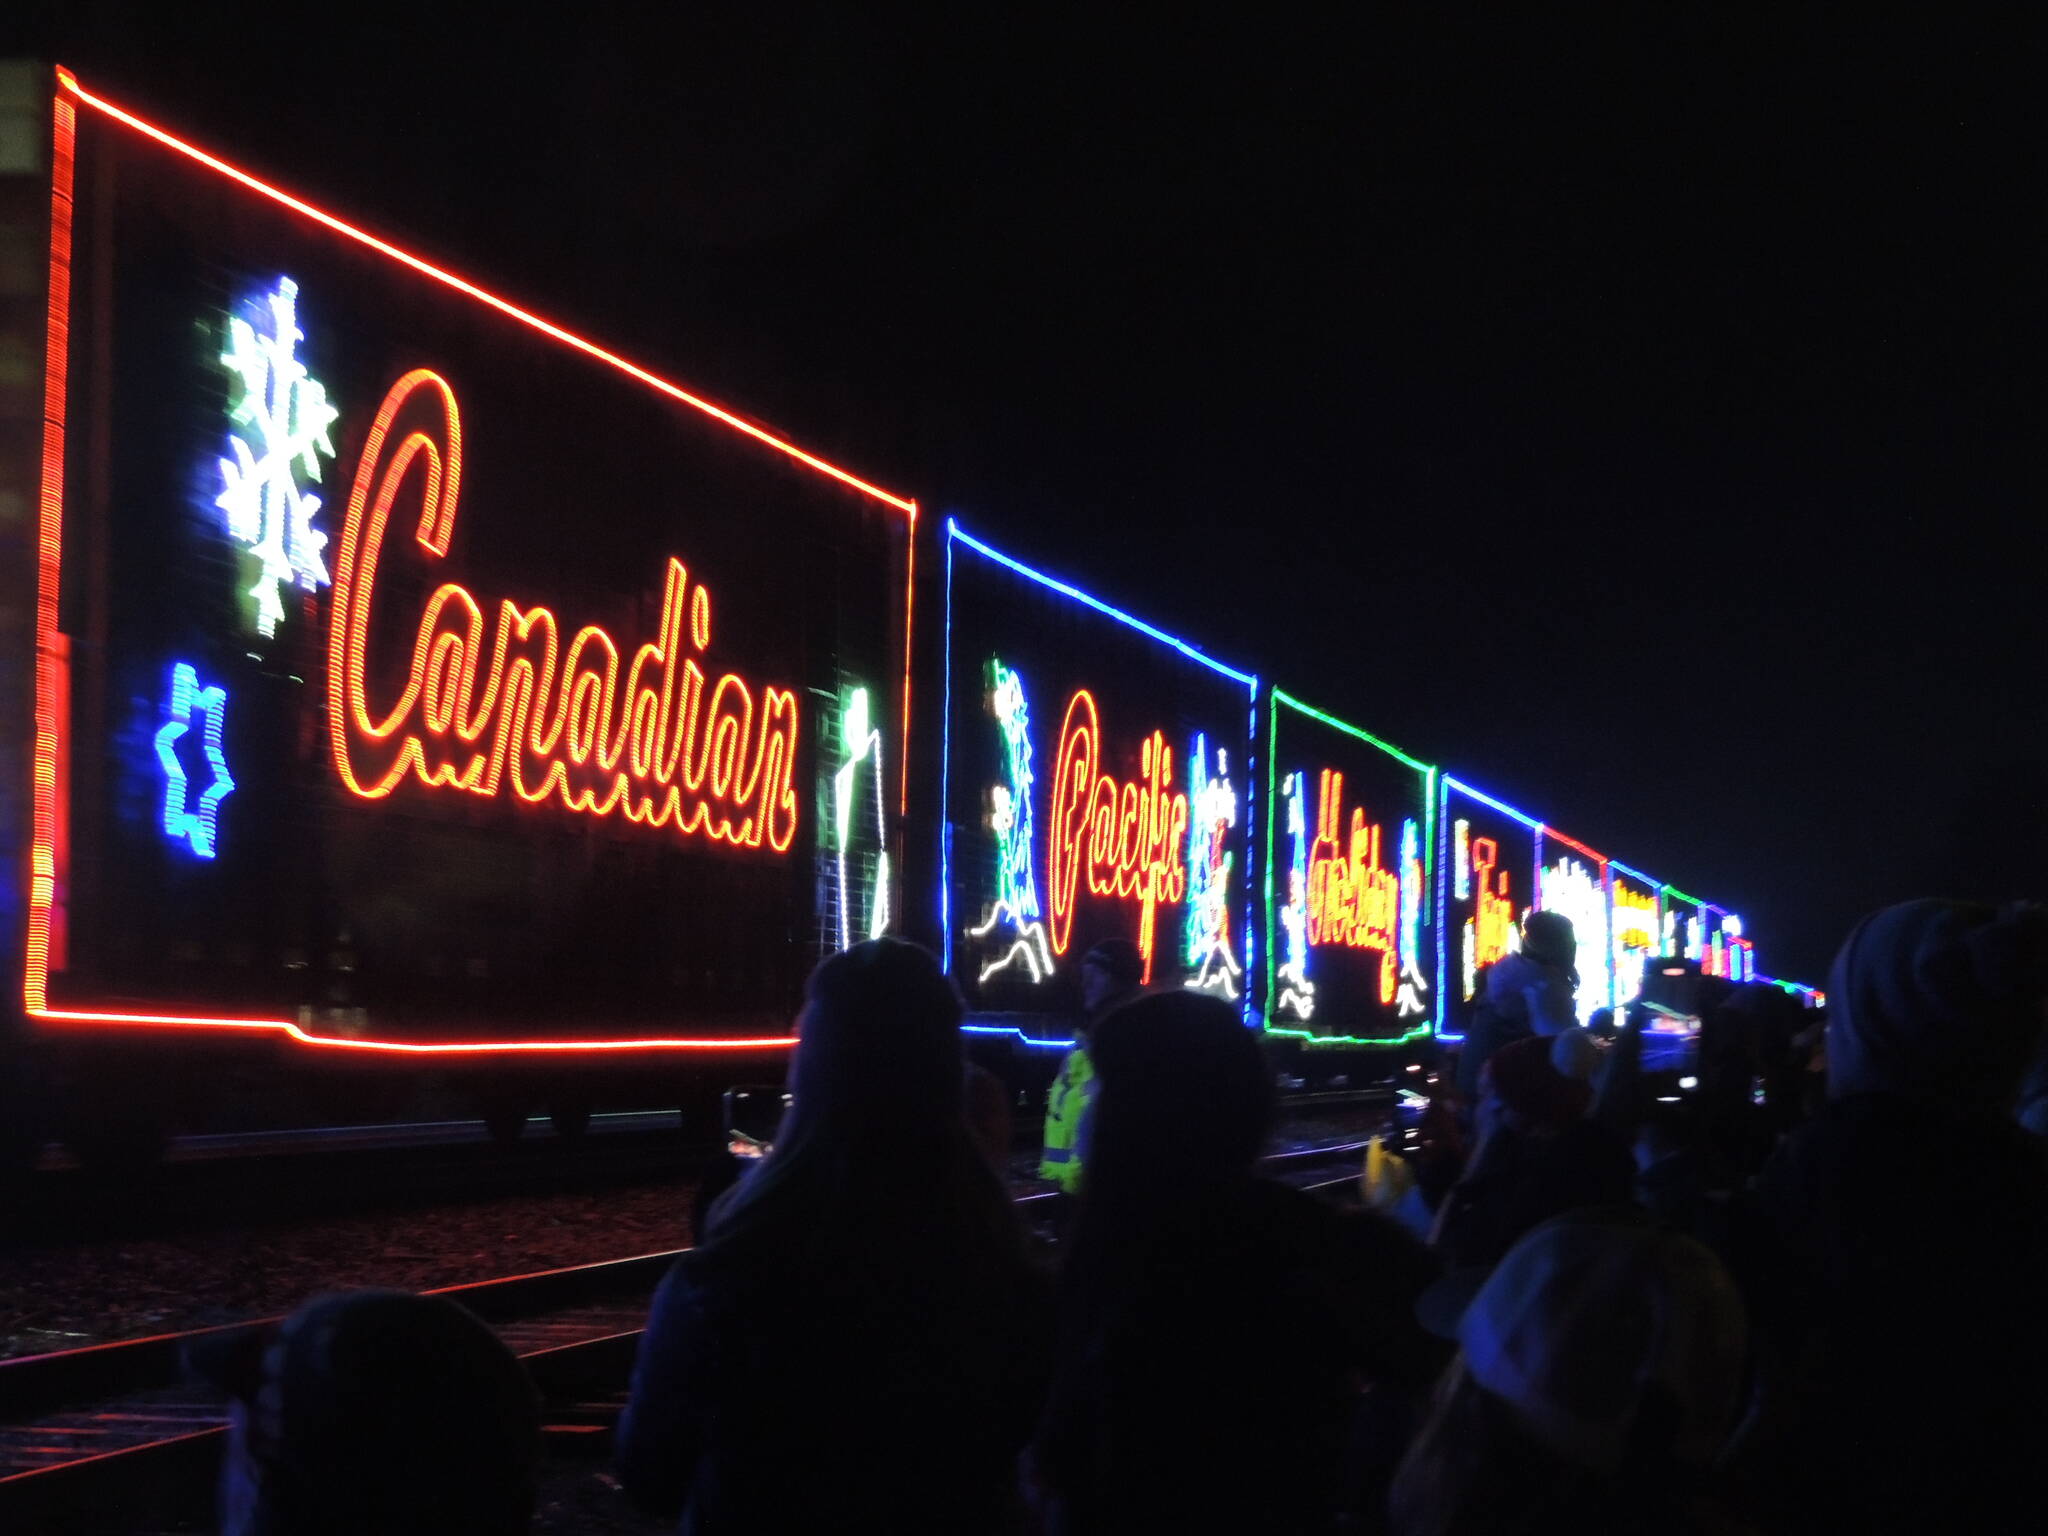 The CP Holiday Train stopped in Agassiz this weekend for the first time in three years. Hundreds of people lined the tracks to check out the holiday display on wheels. (Adam Louis/Observer)